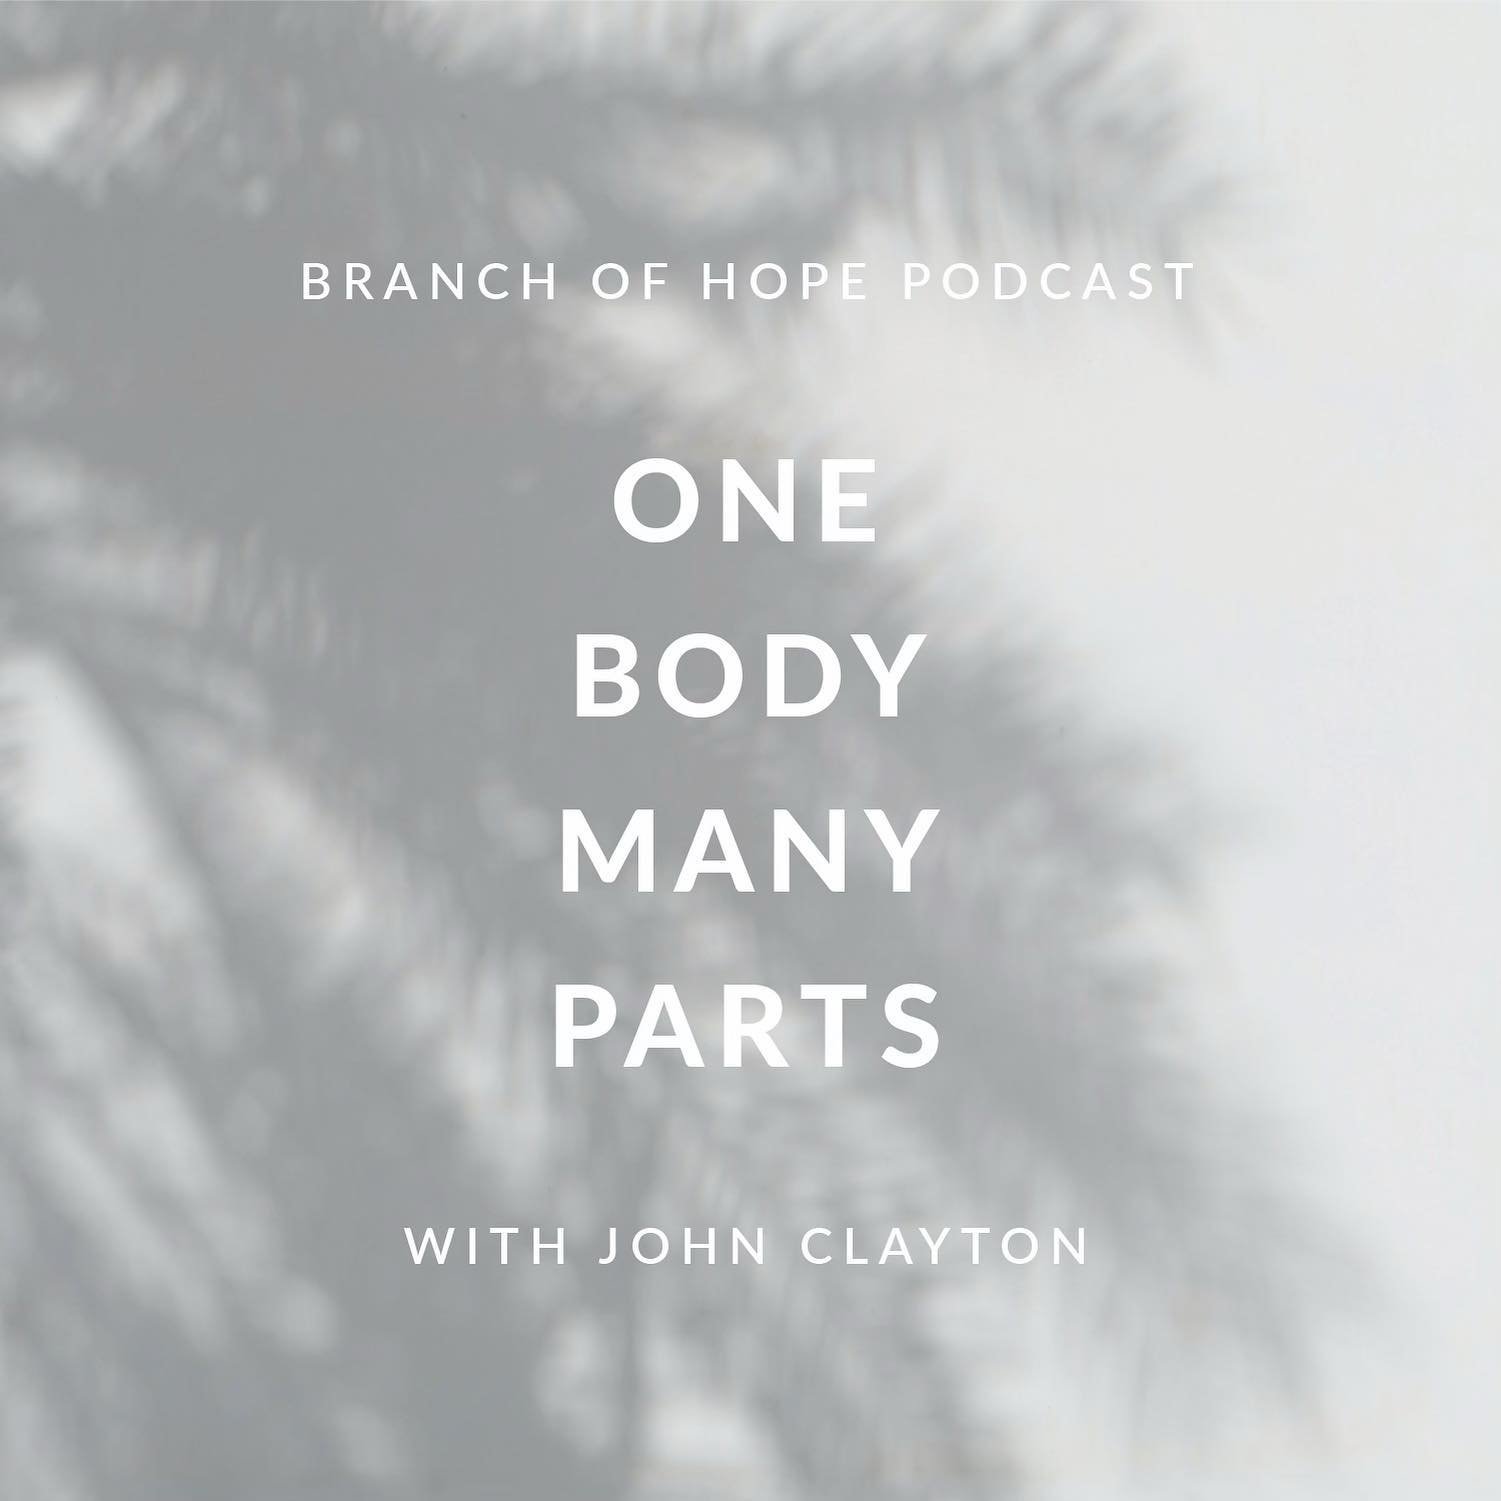 listen to our latest branch of hope podcast episode with john clayton on apple podcasts!!!